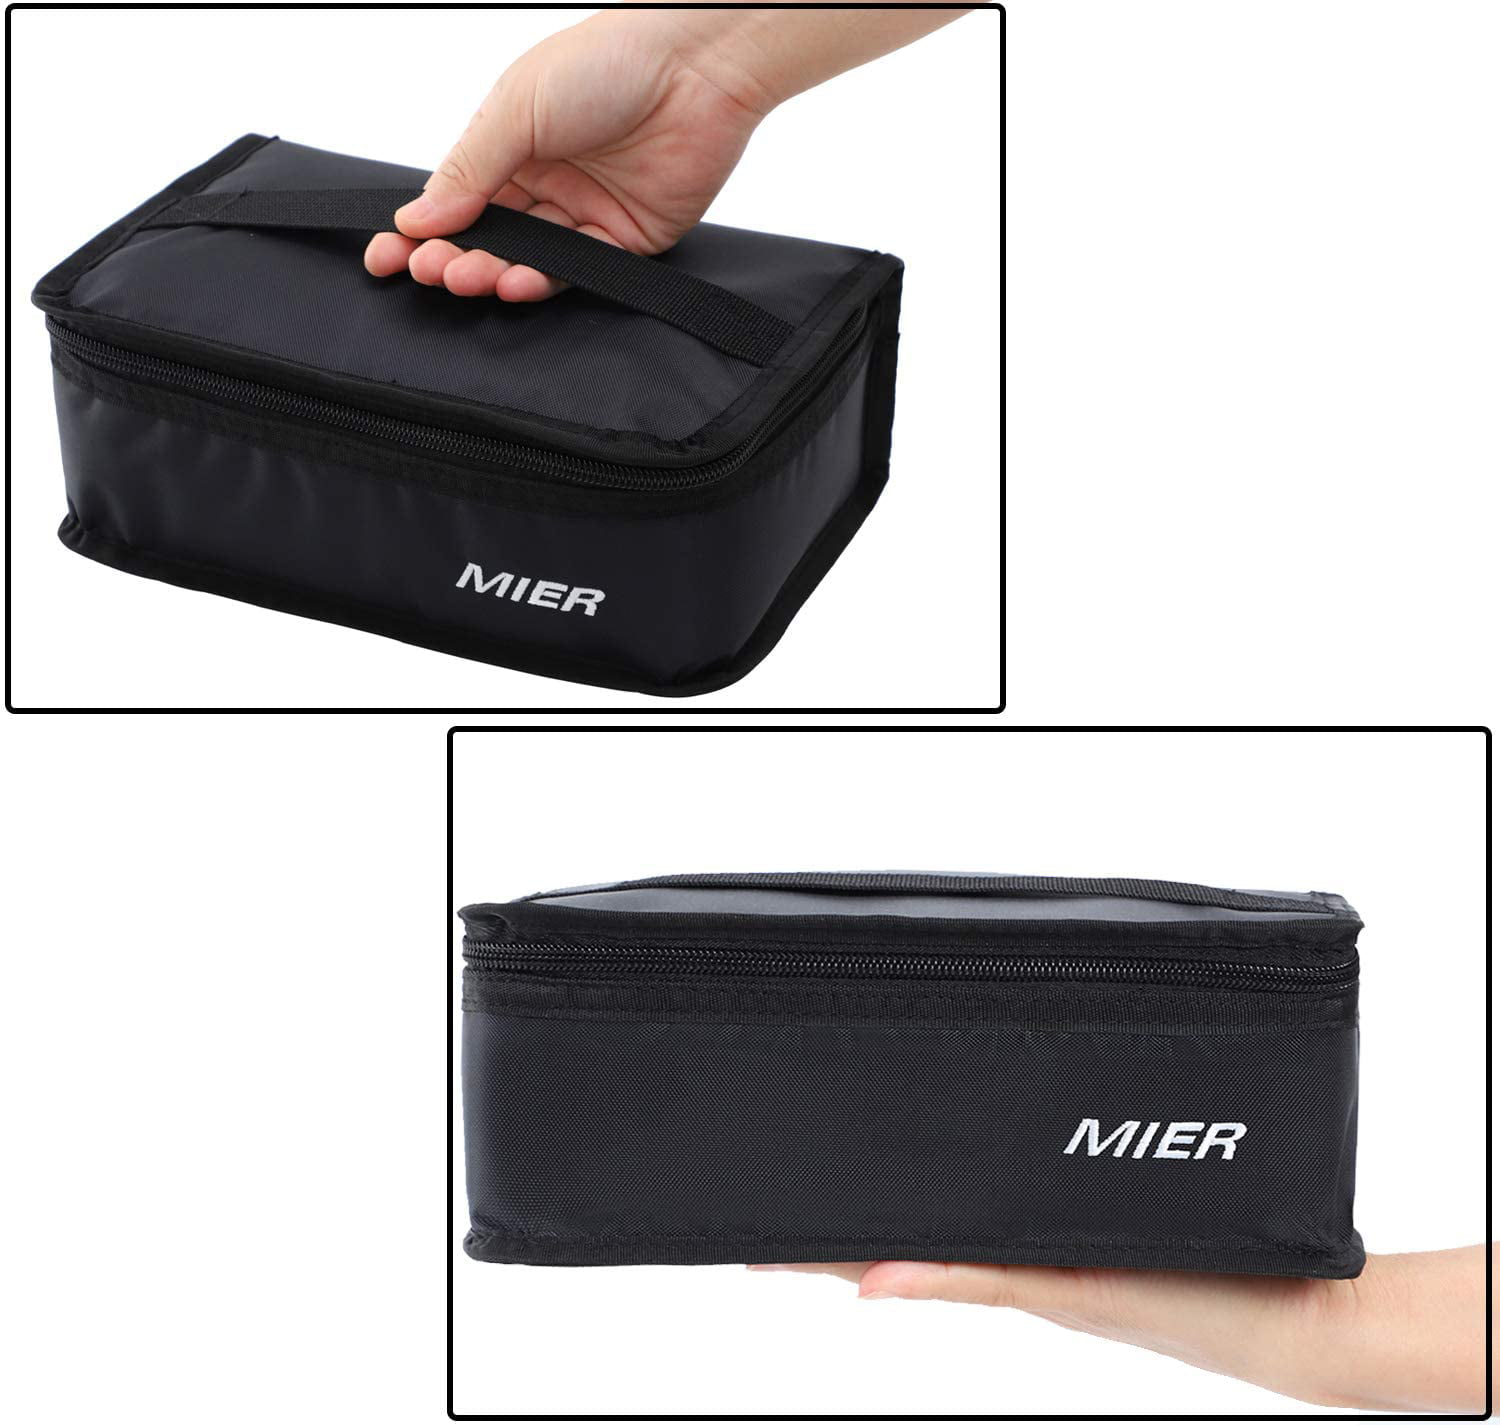 MIER 2 Compartment Kids Small Lunch Box Bag for Boys Girls Toddlers, Double  Deck Leakproof Lunchbox …See more MIER 2 Compartment Kids Small Lunch Box